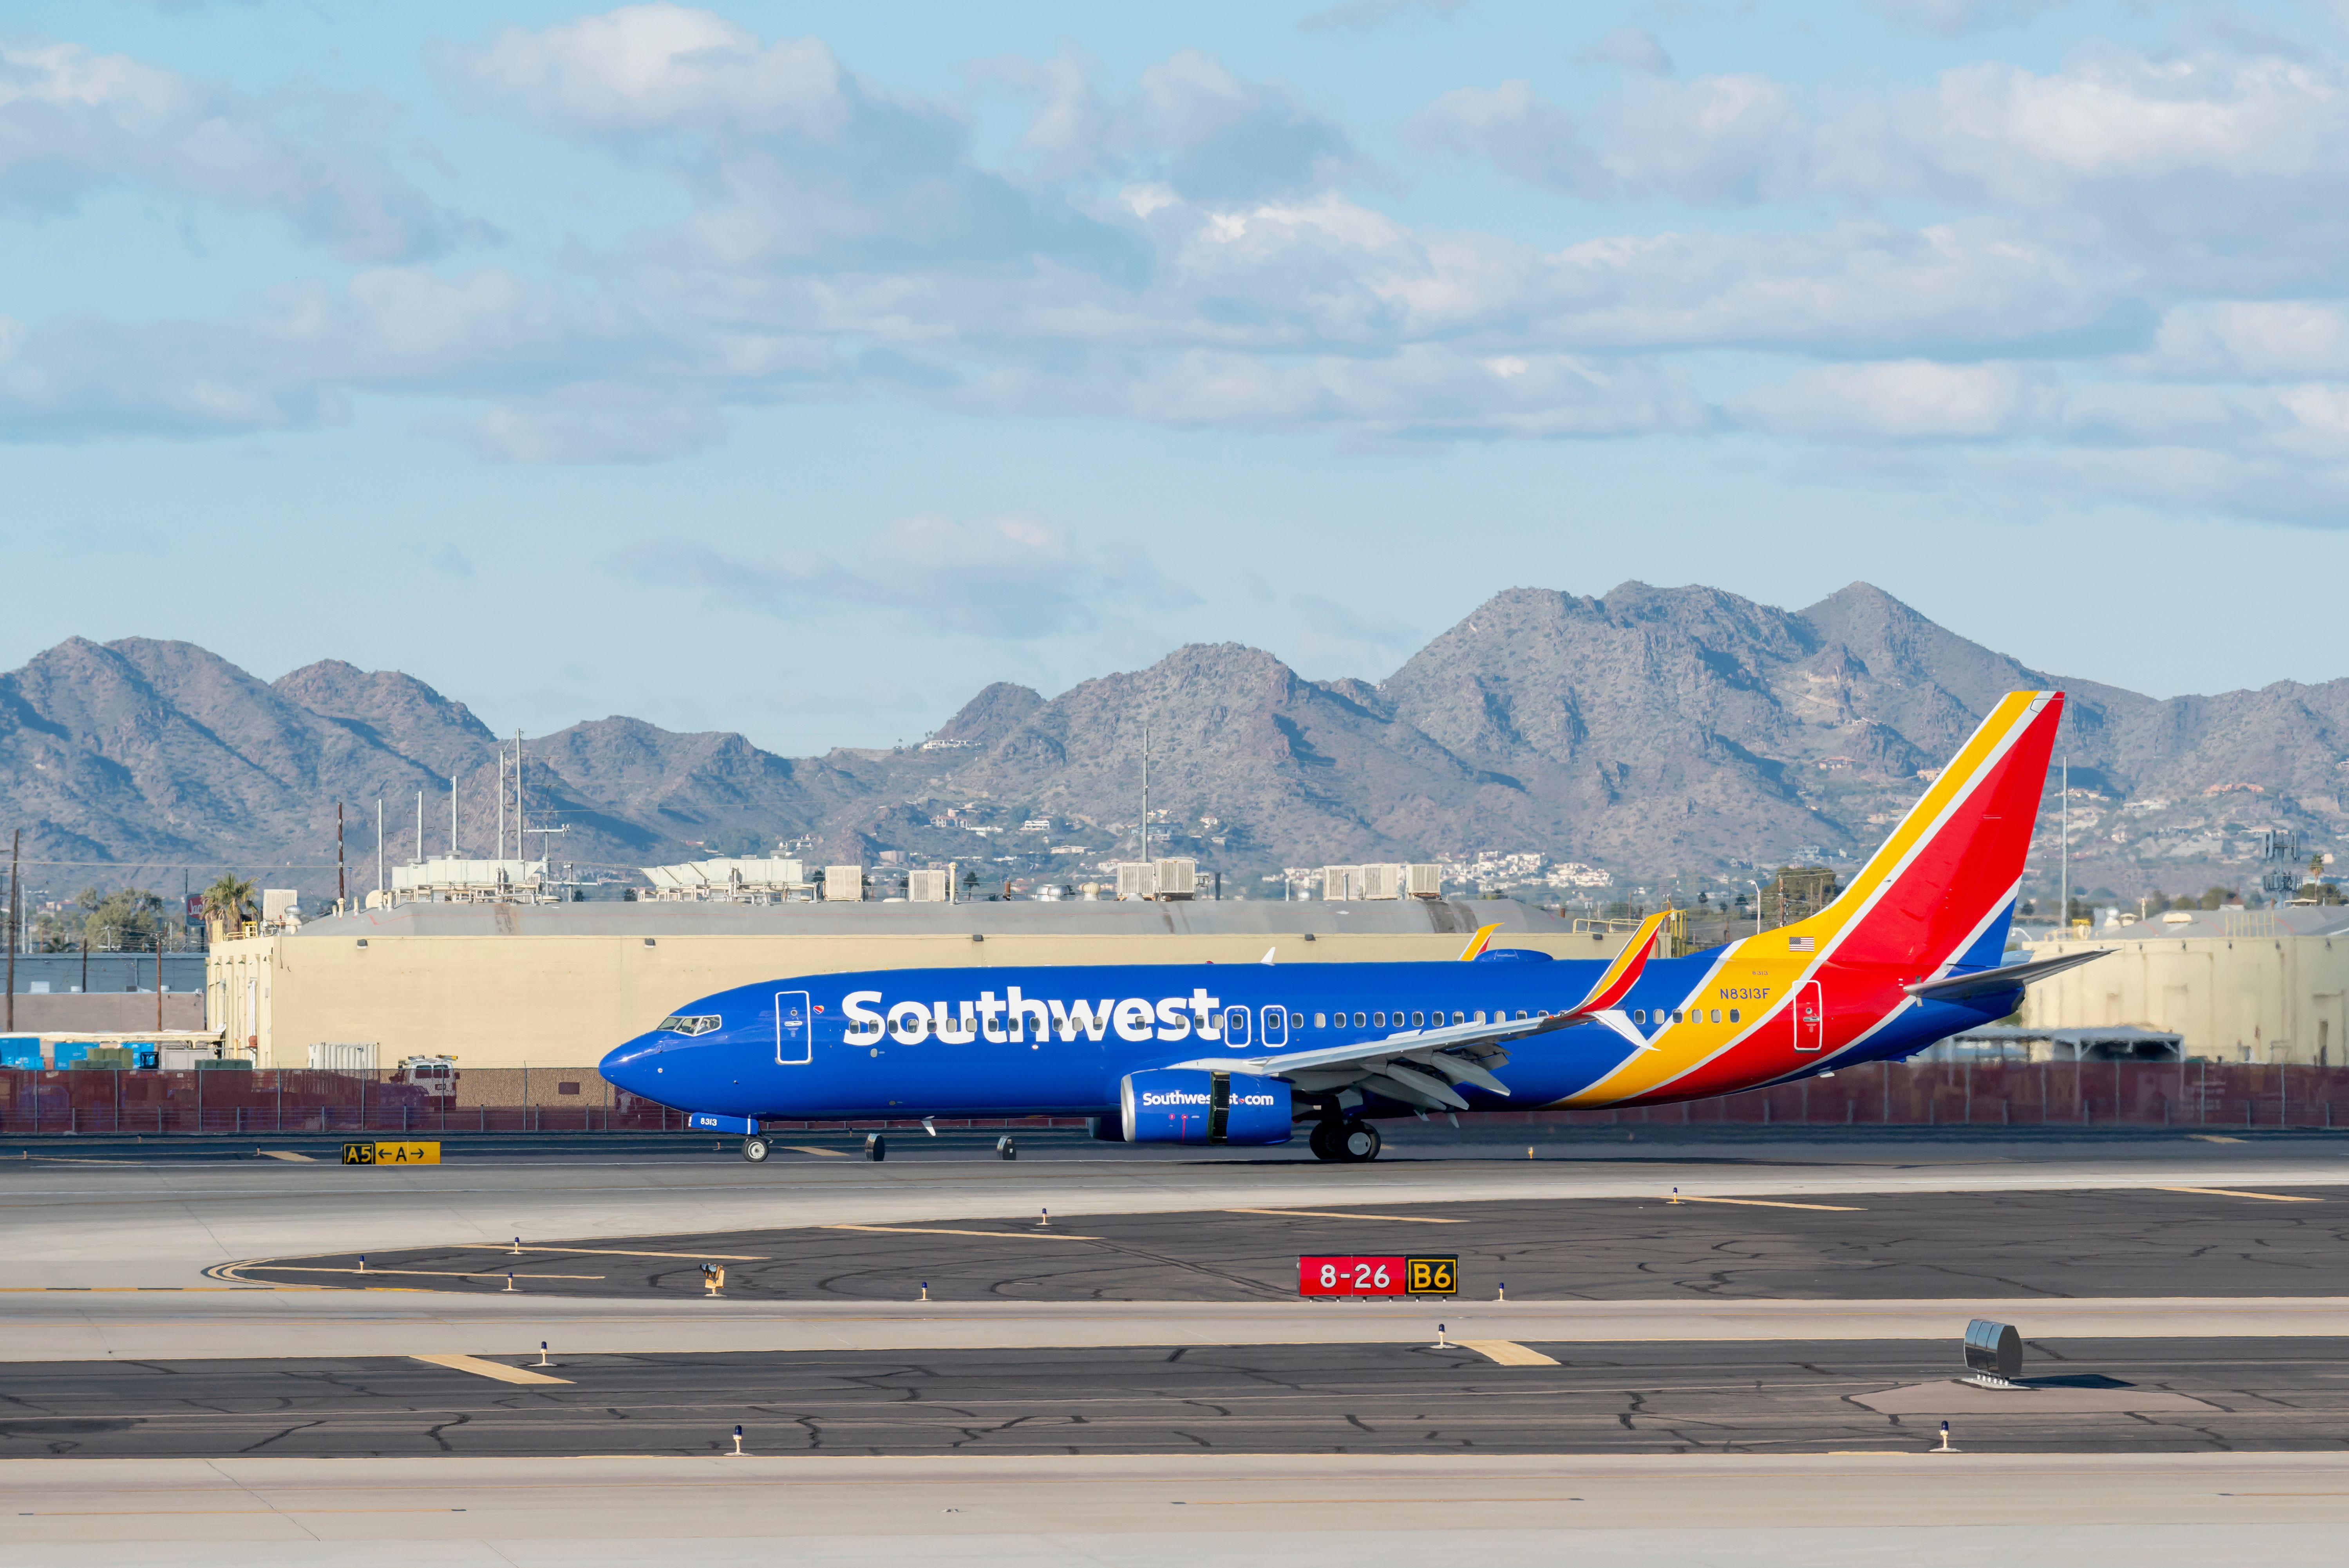 A Southwest Airlines 737 just after landing at Phoenix Sky Harbor International Airport.